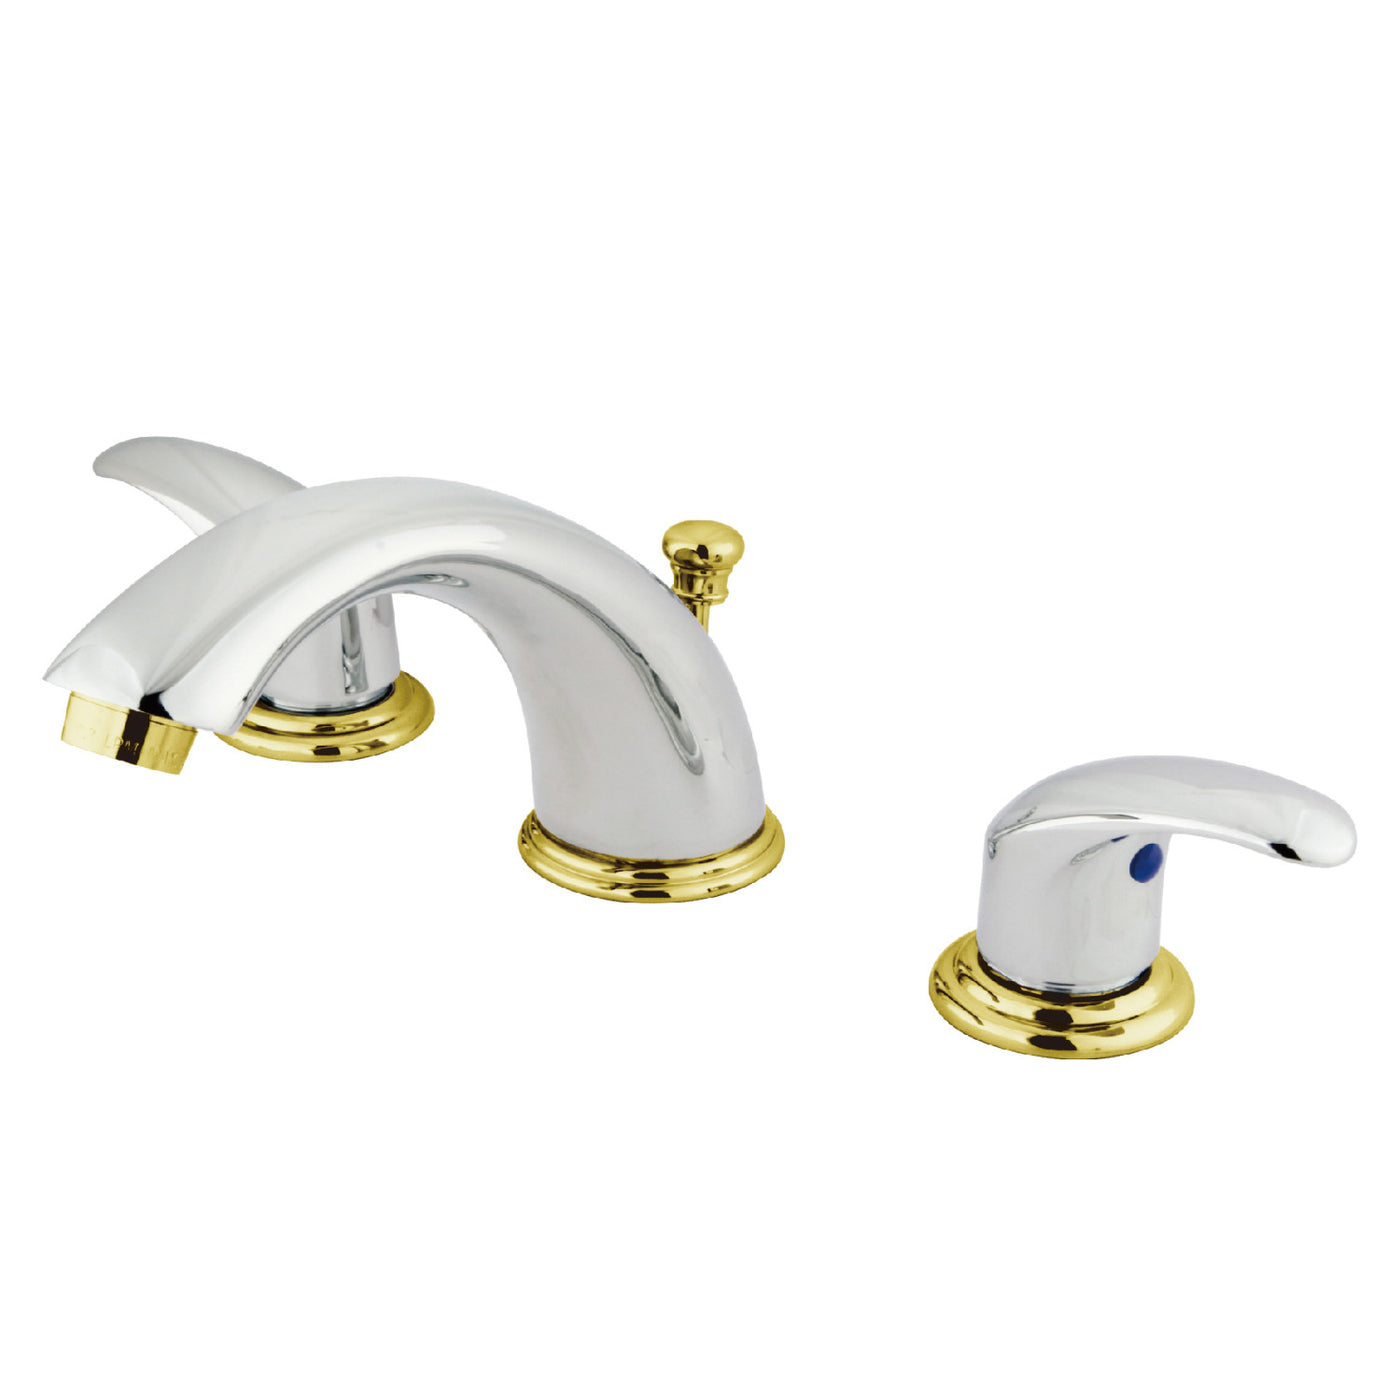 Elements of Design EB6964LL Widespread Bathroom Faucet with Retail Pop-Up, Polished Chrome/Polished Brass